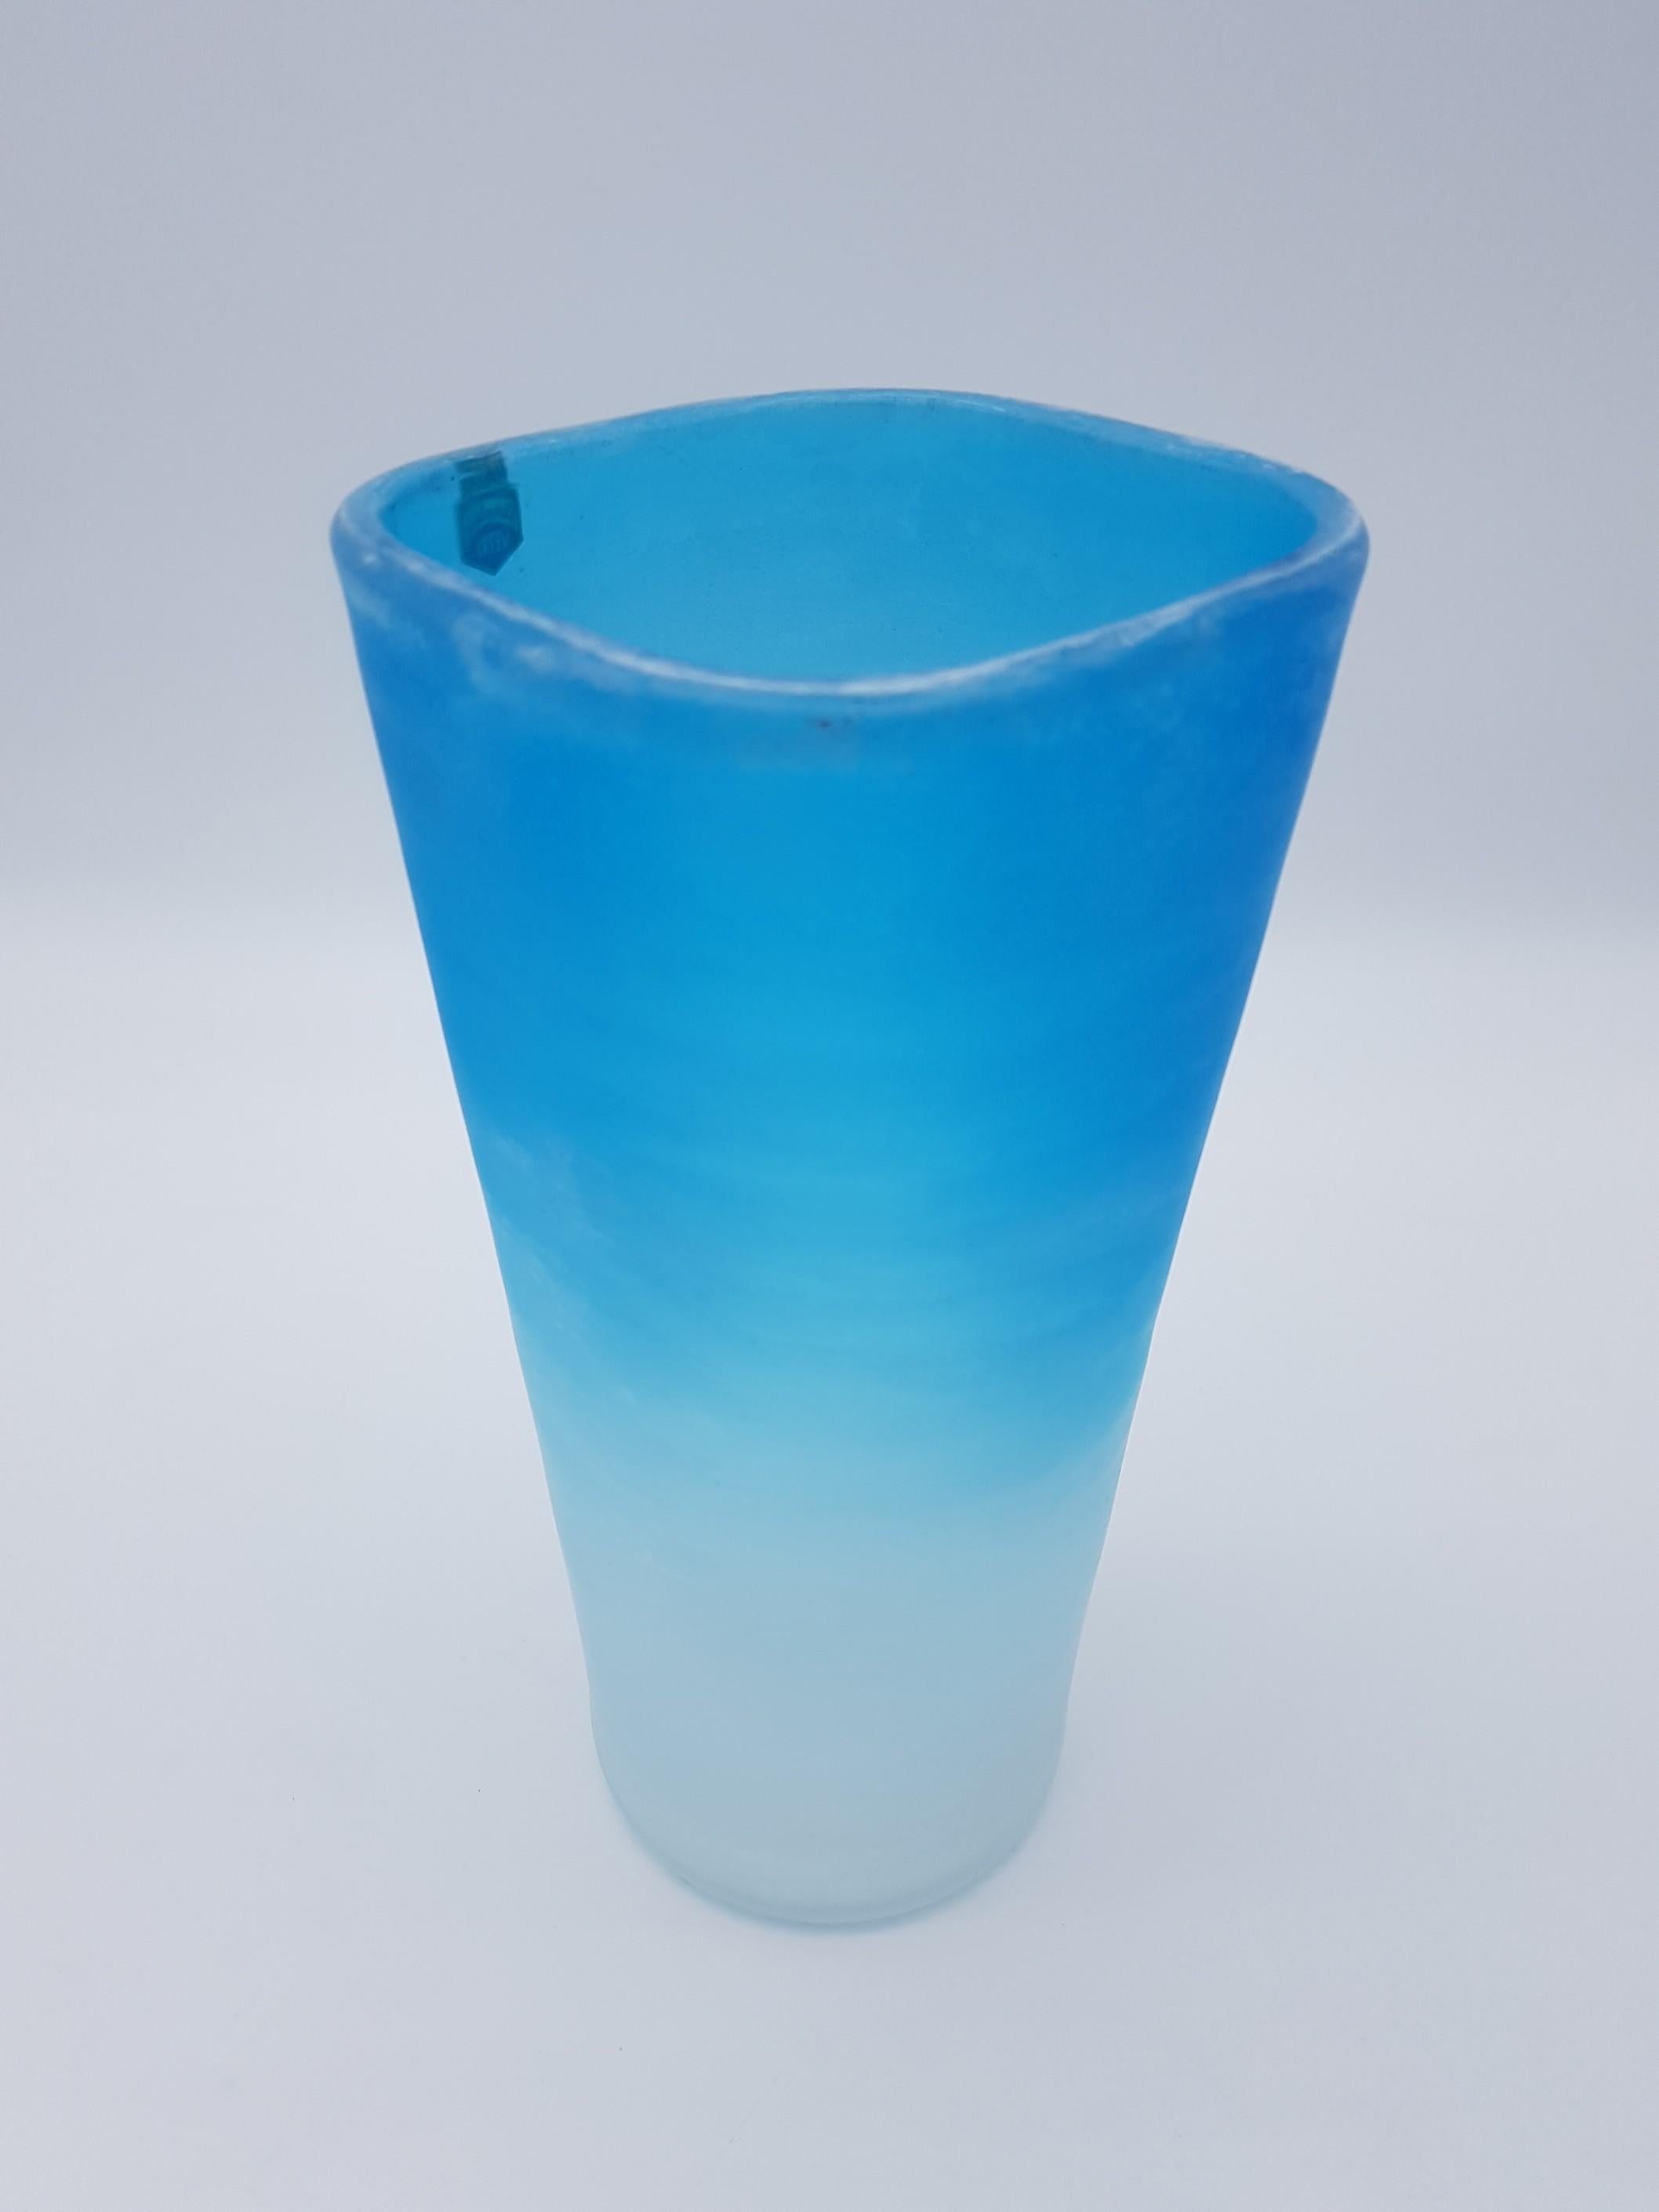 Hand-Crafted Modern Murano Glass Vase, Blue Color in 